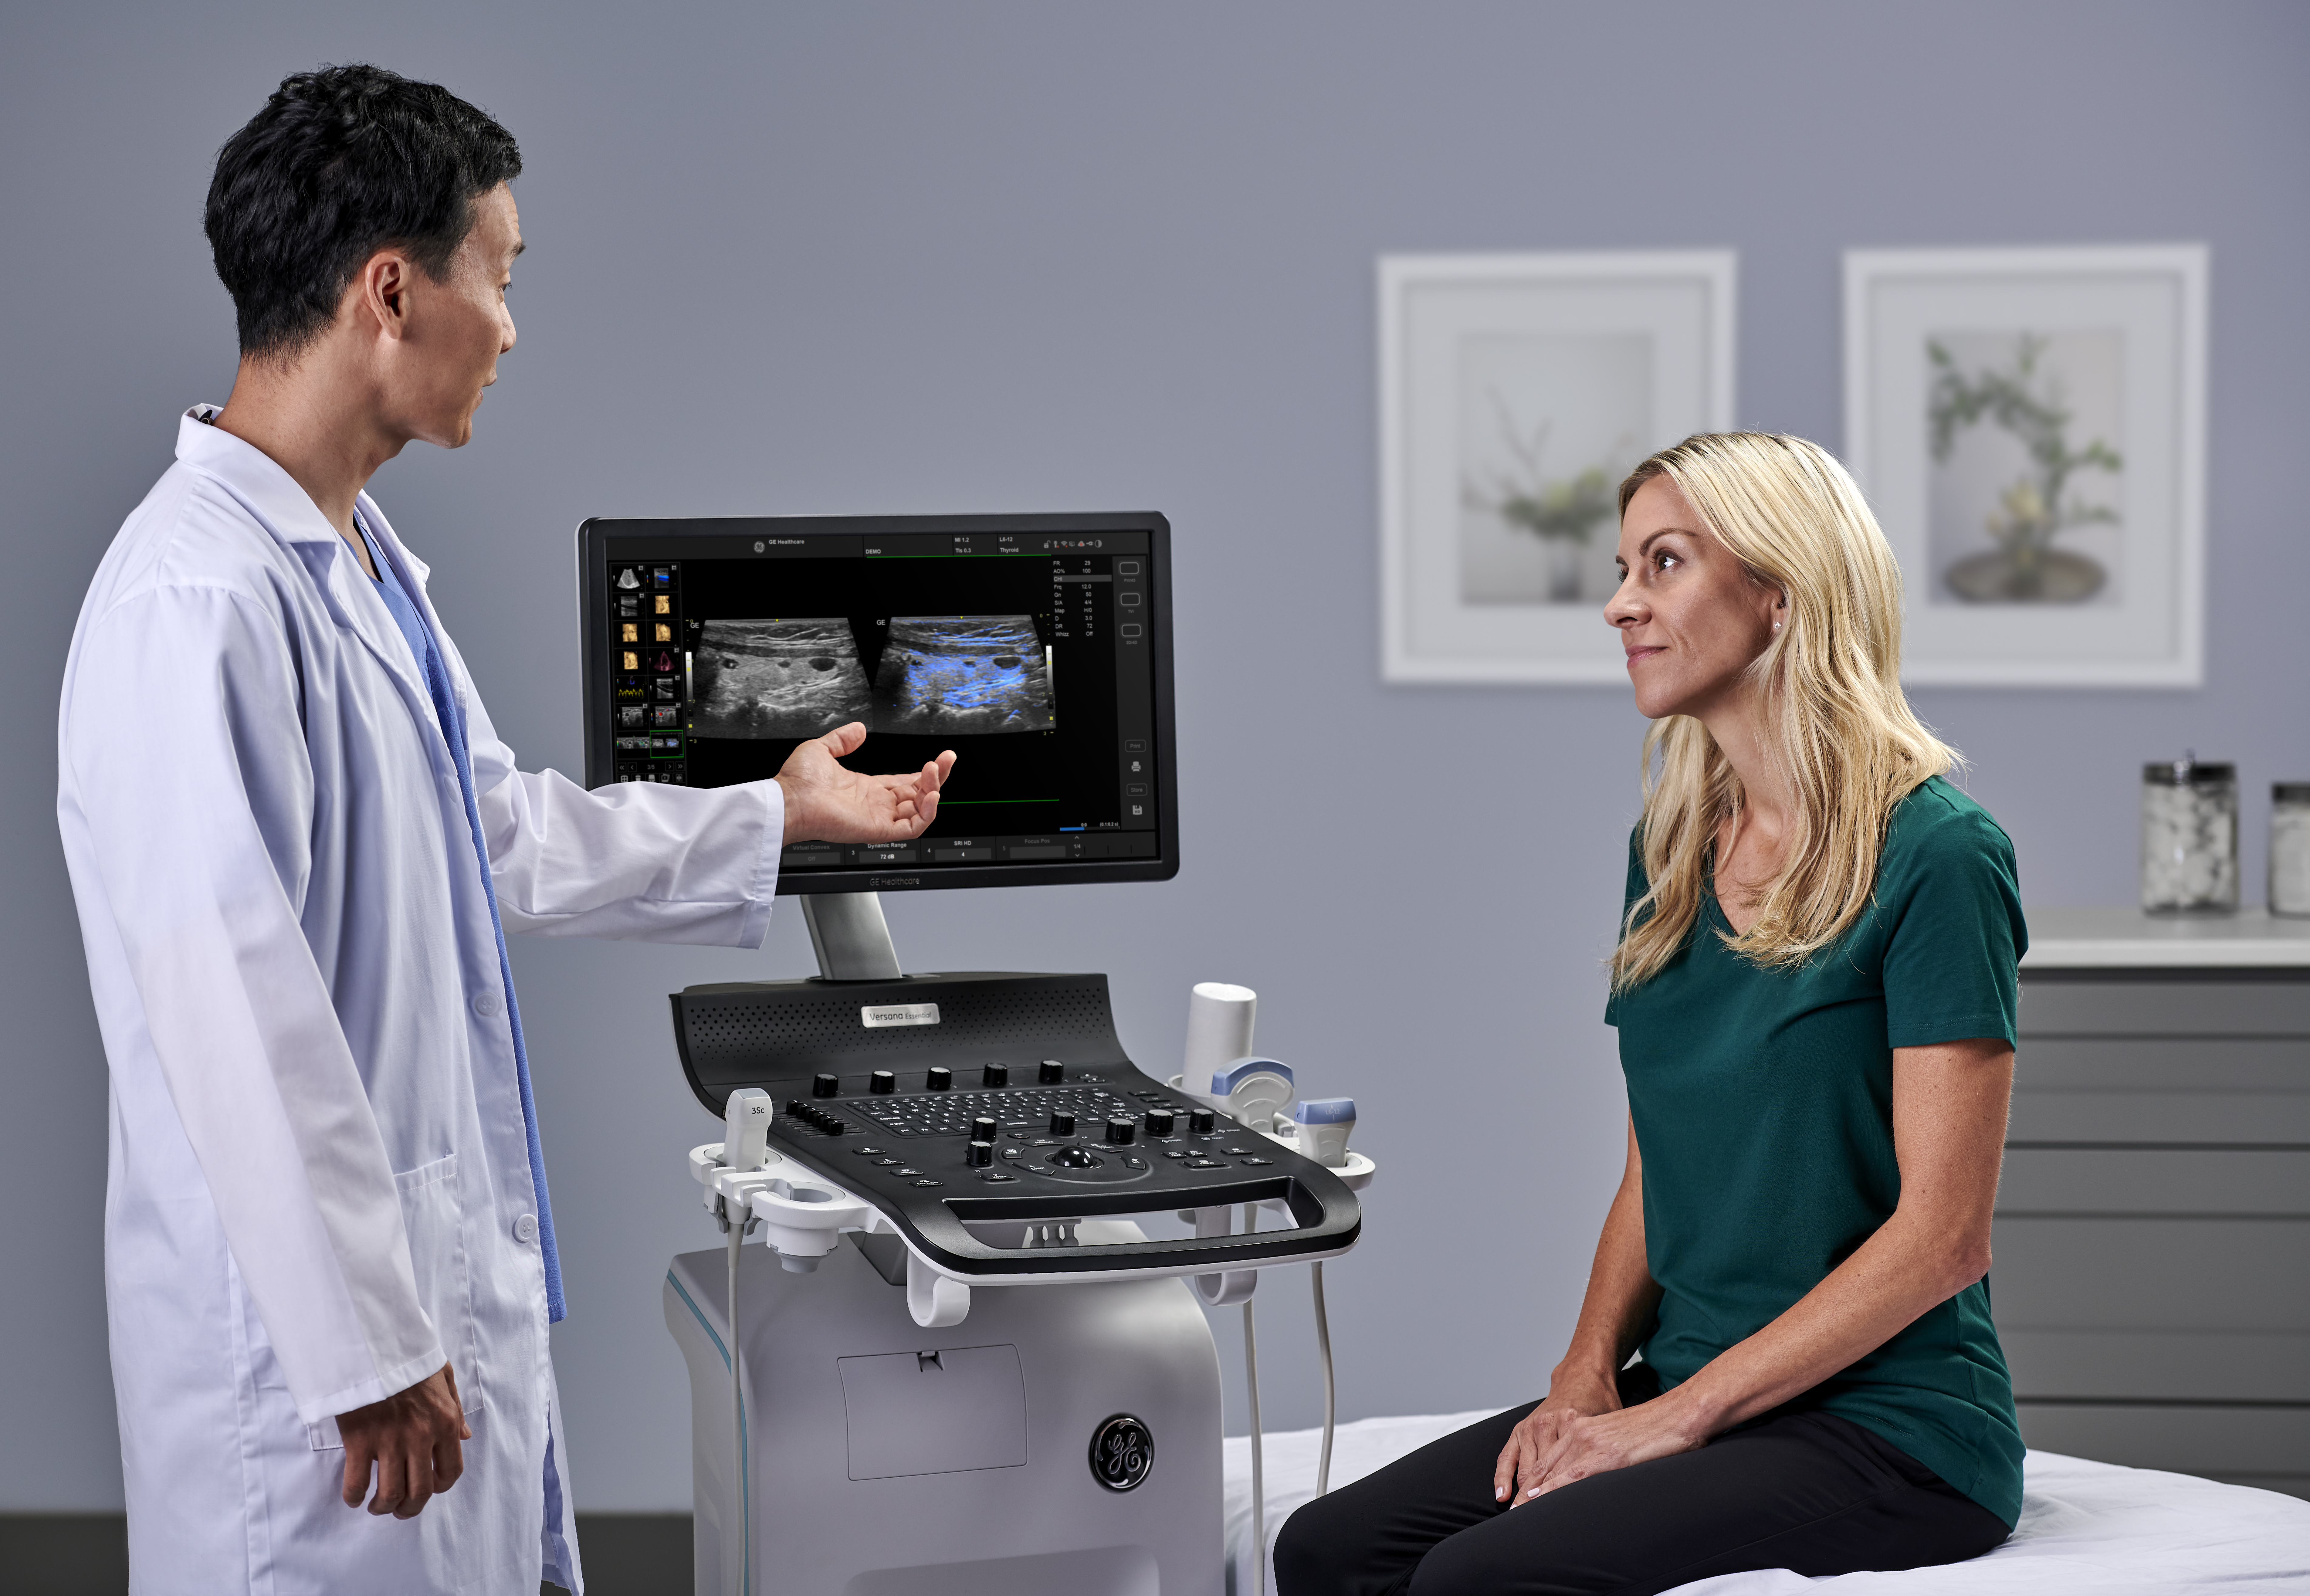 Integrating primary ultrasound into your practice can help increase revenue and your scope of patient care.